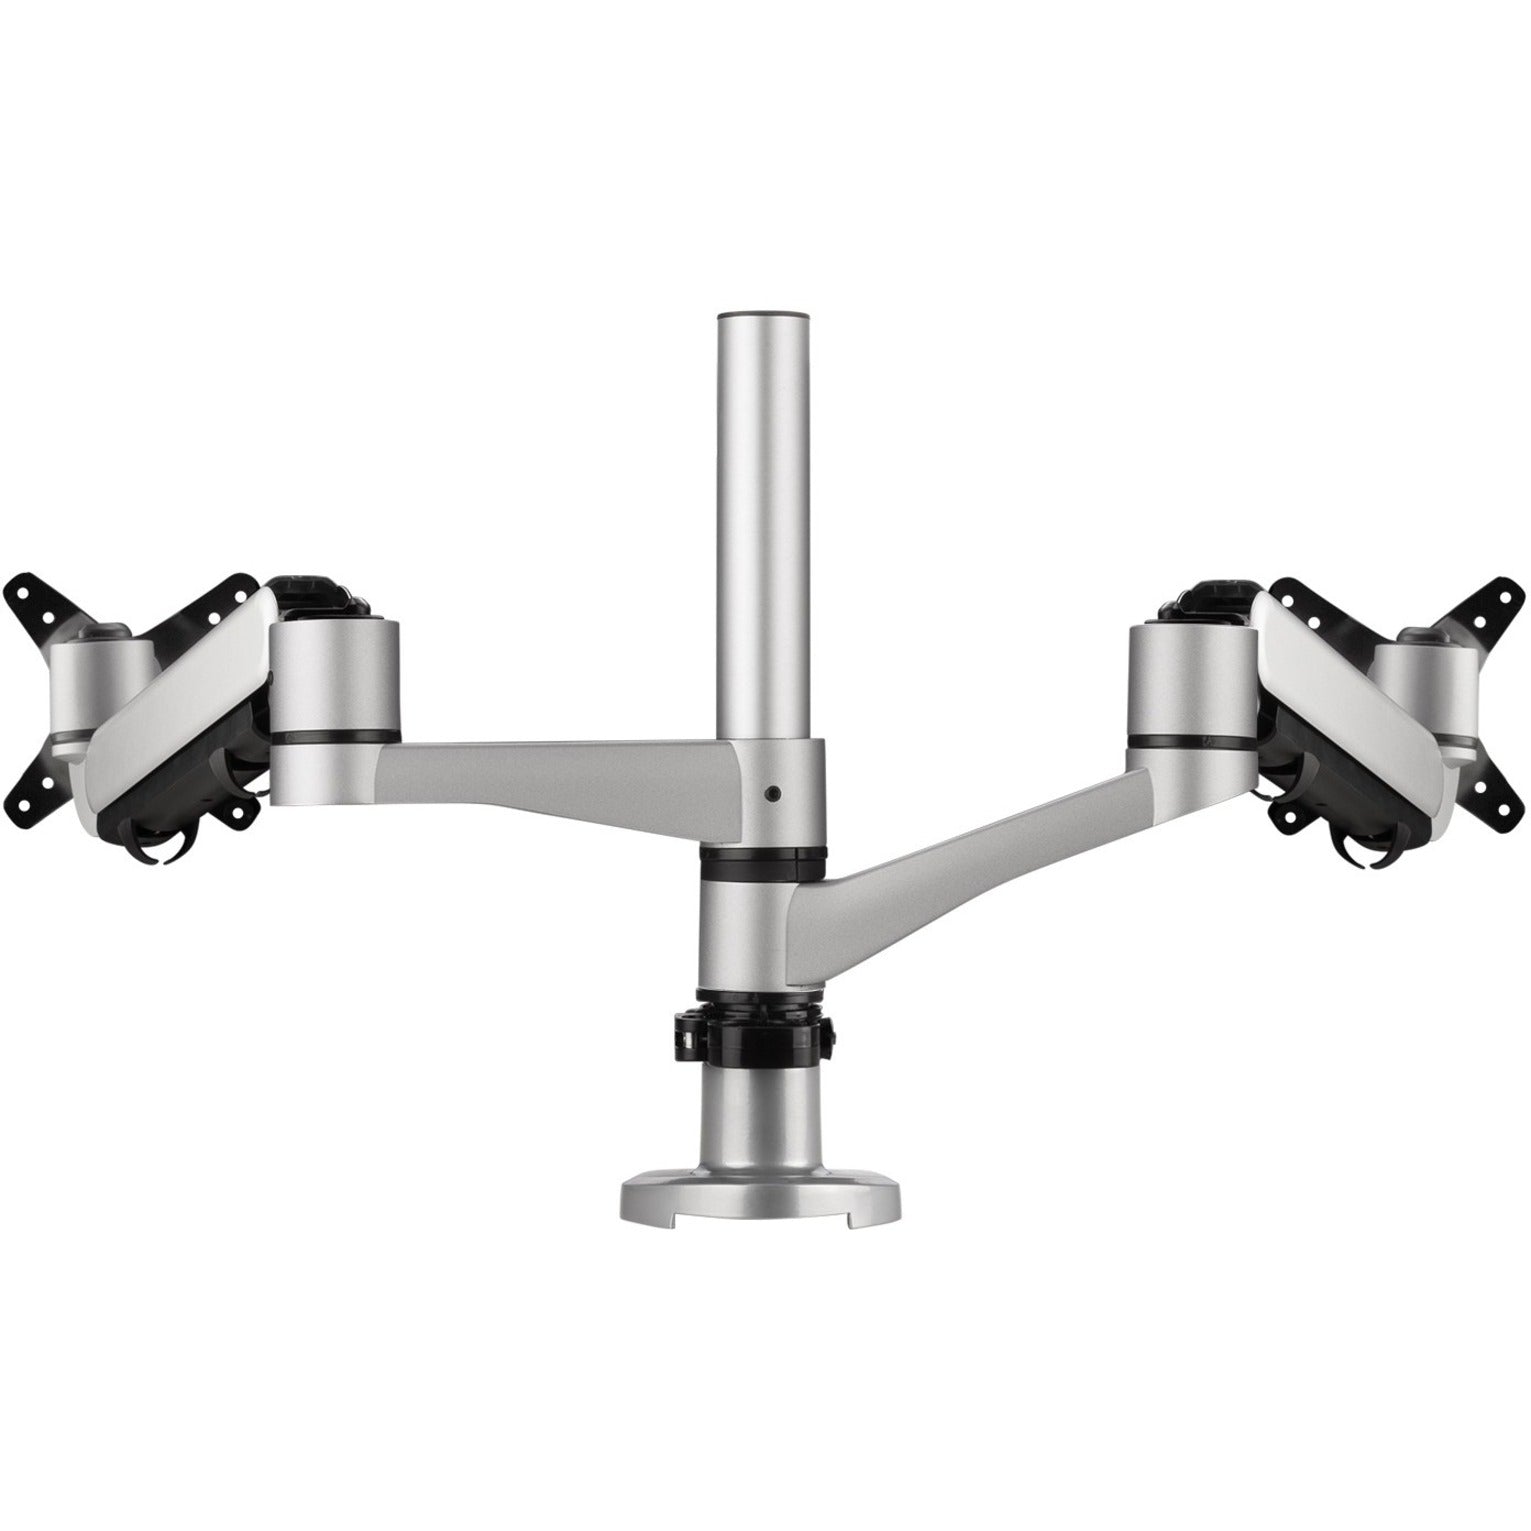 ViewSonic LCD-DMA-002 Spring-Loaded Dual Monitor Mounting Arm for Two Monitors up to 27", Adjustable Tension, Ergonomic, Cable Management